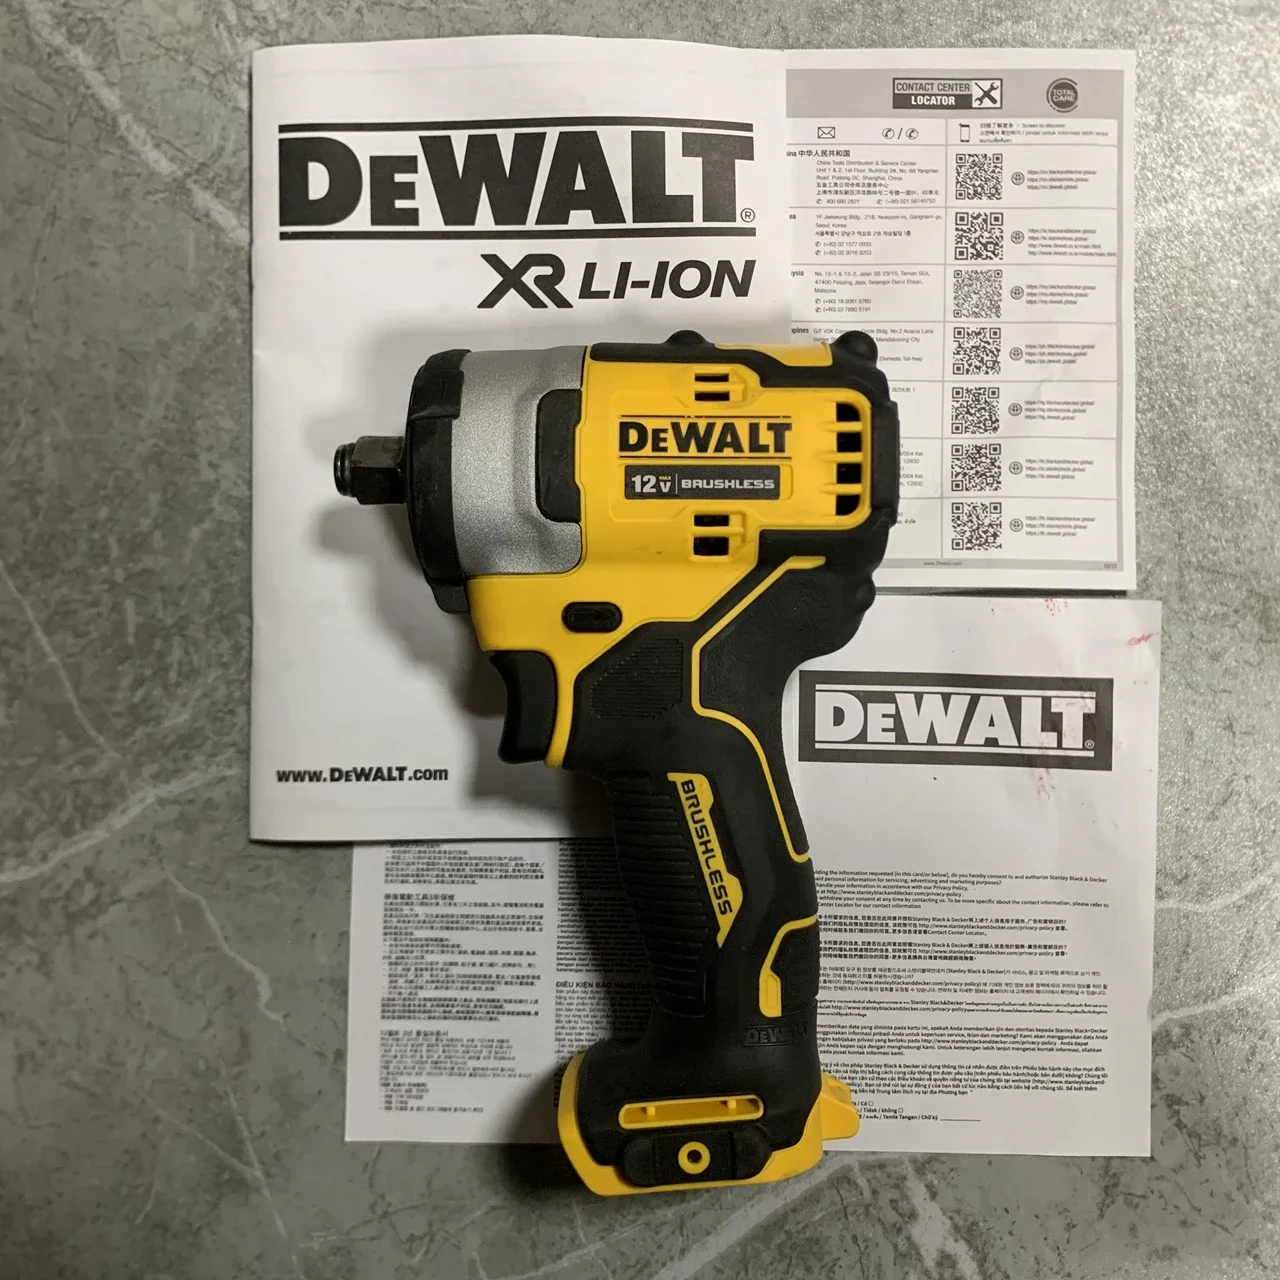 

DeWALT DCF901B 12V MAX XTREME 1/2" Brushless Cordless Impact Wrench - Bare Tool second-hand